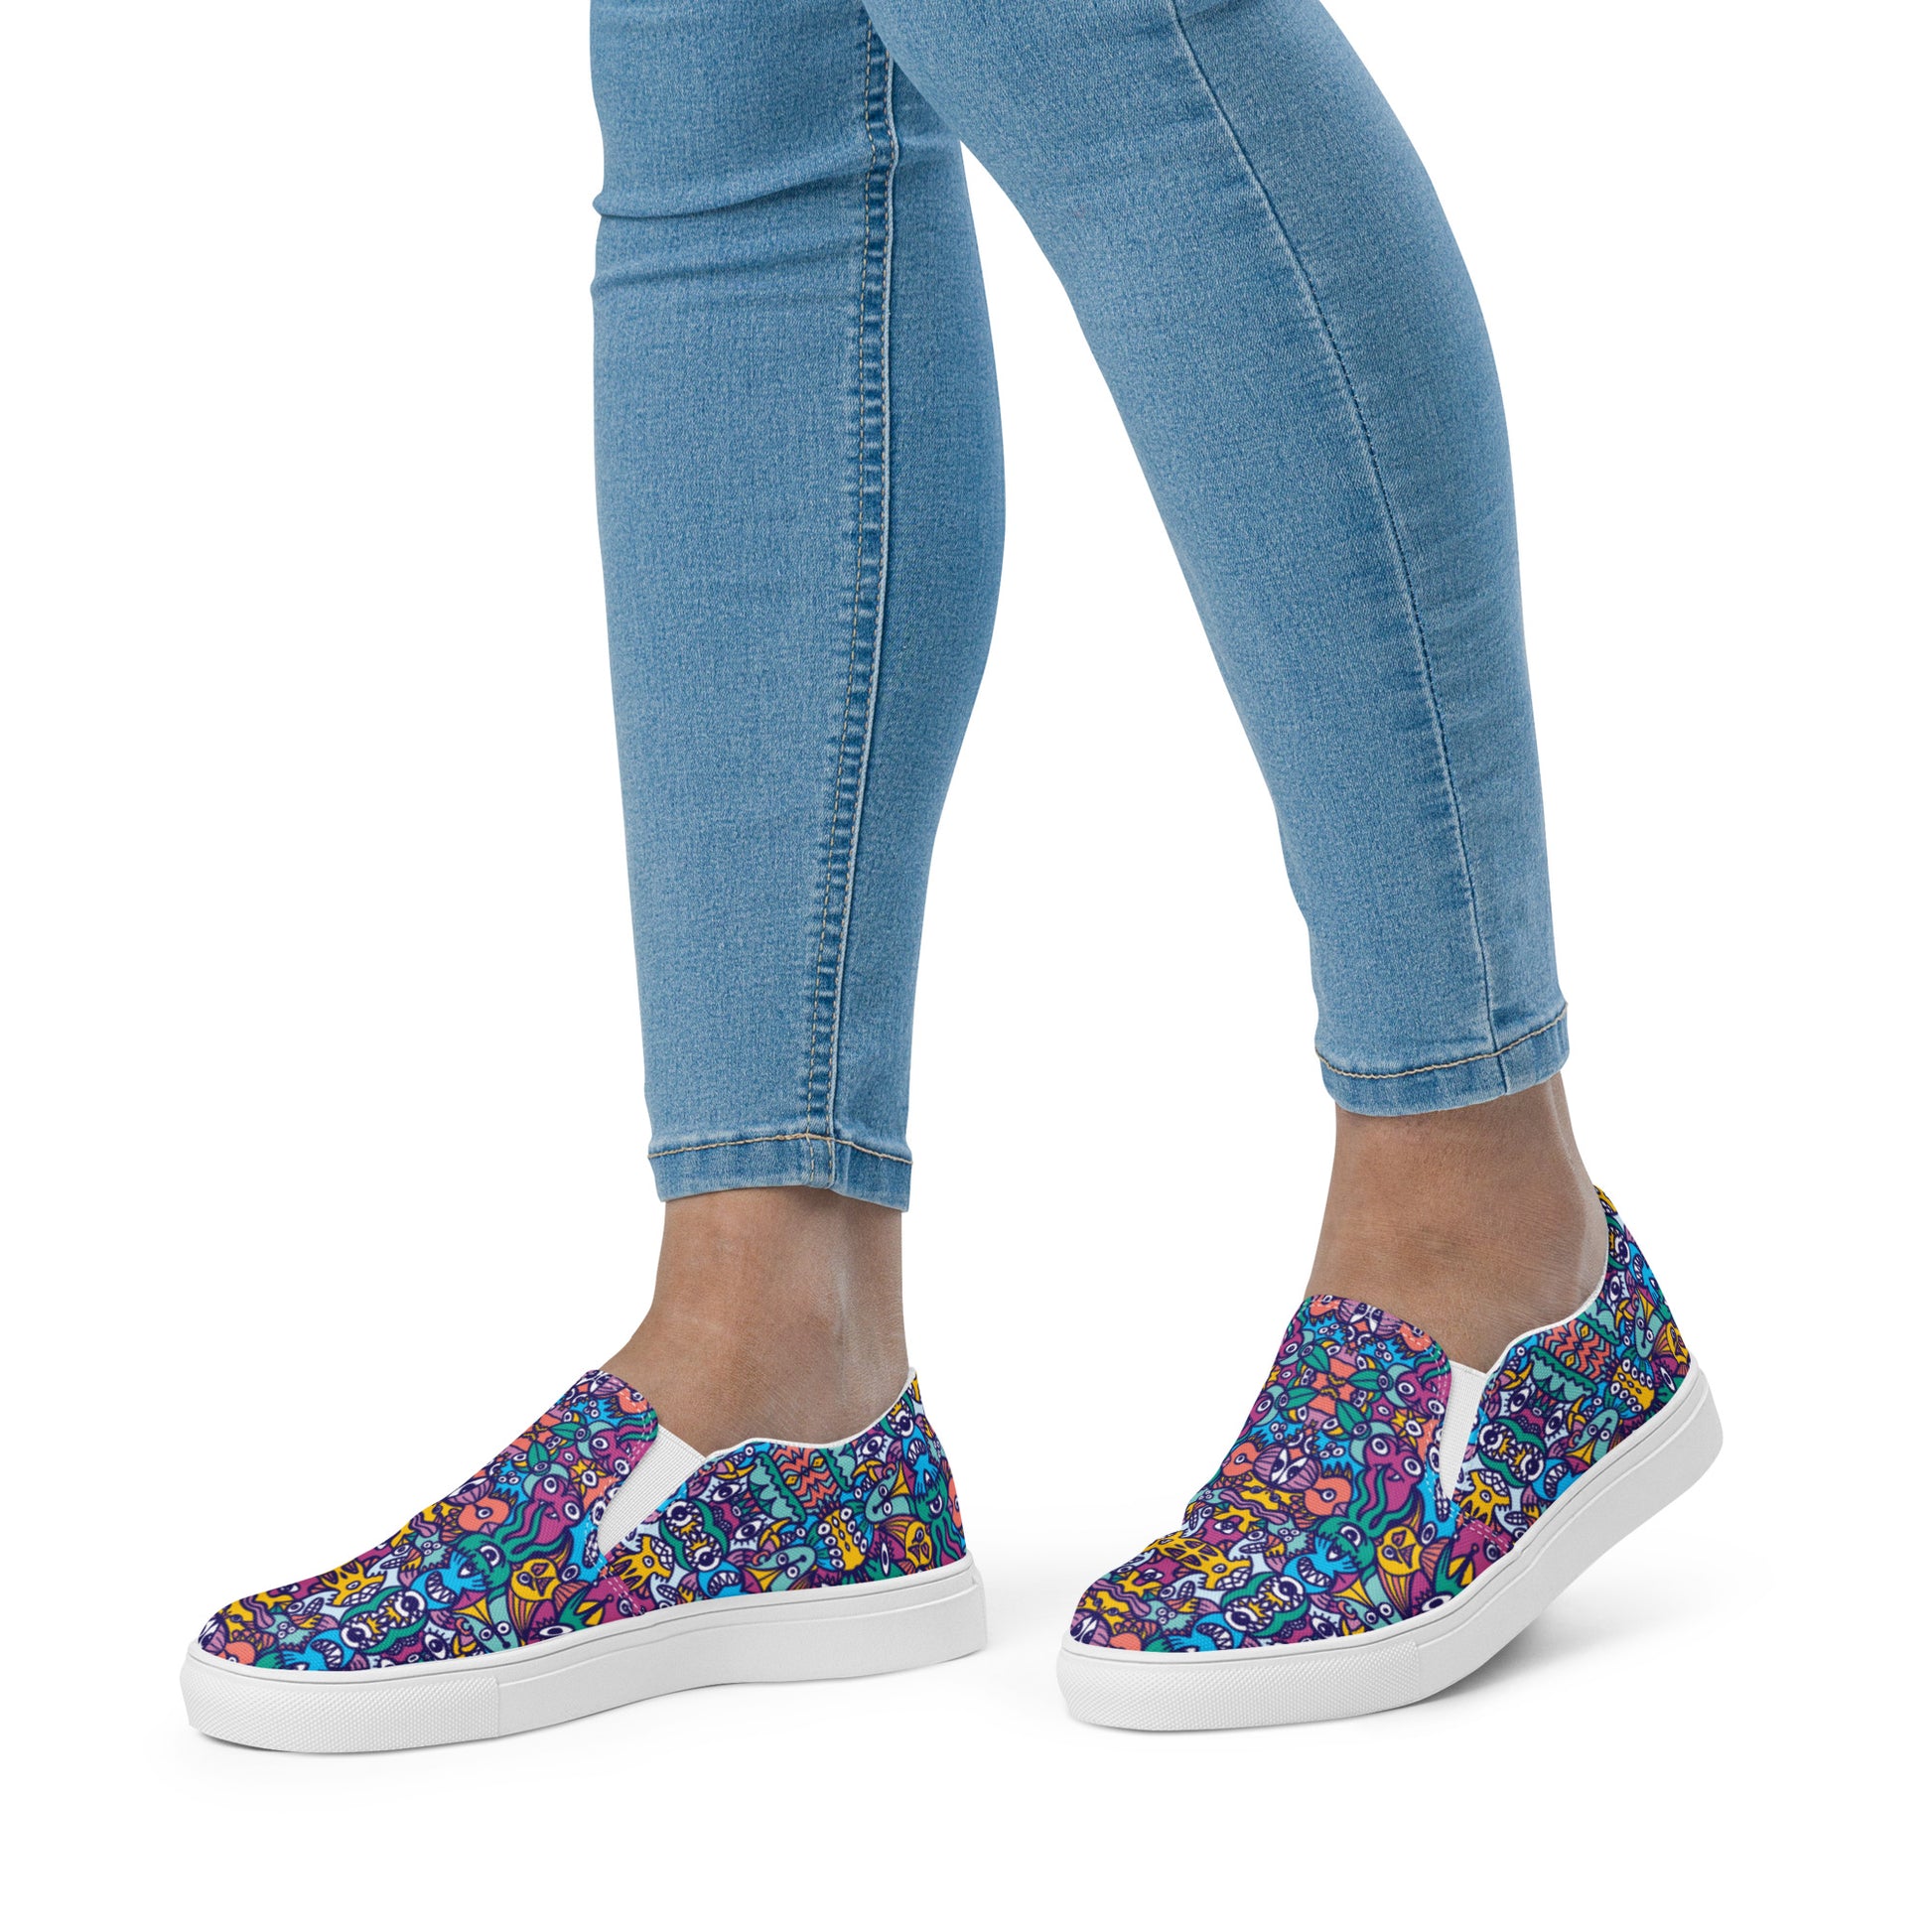 Whimsical design featuring multicolor critters from another world Women’s slip-on canvas shoes. Lifestyle